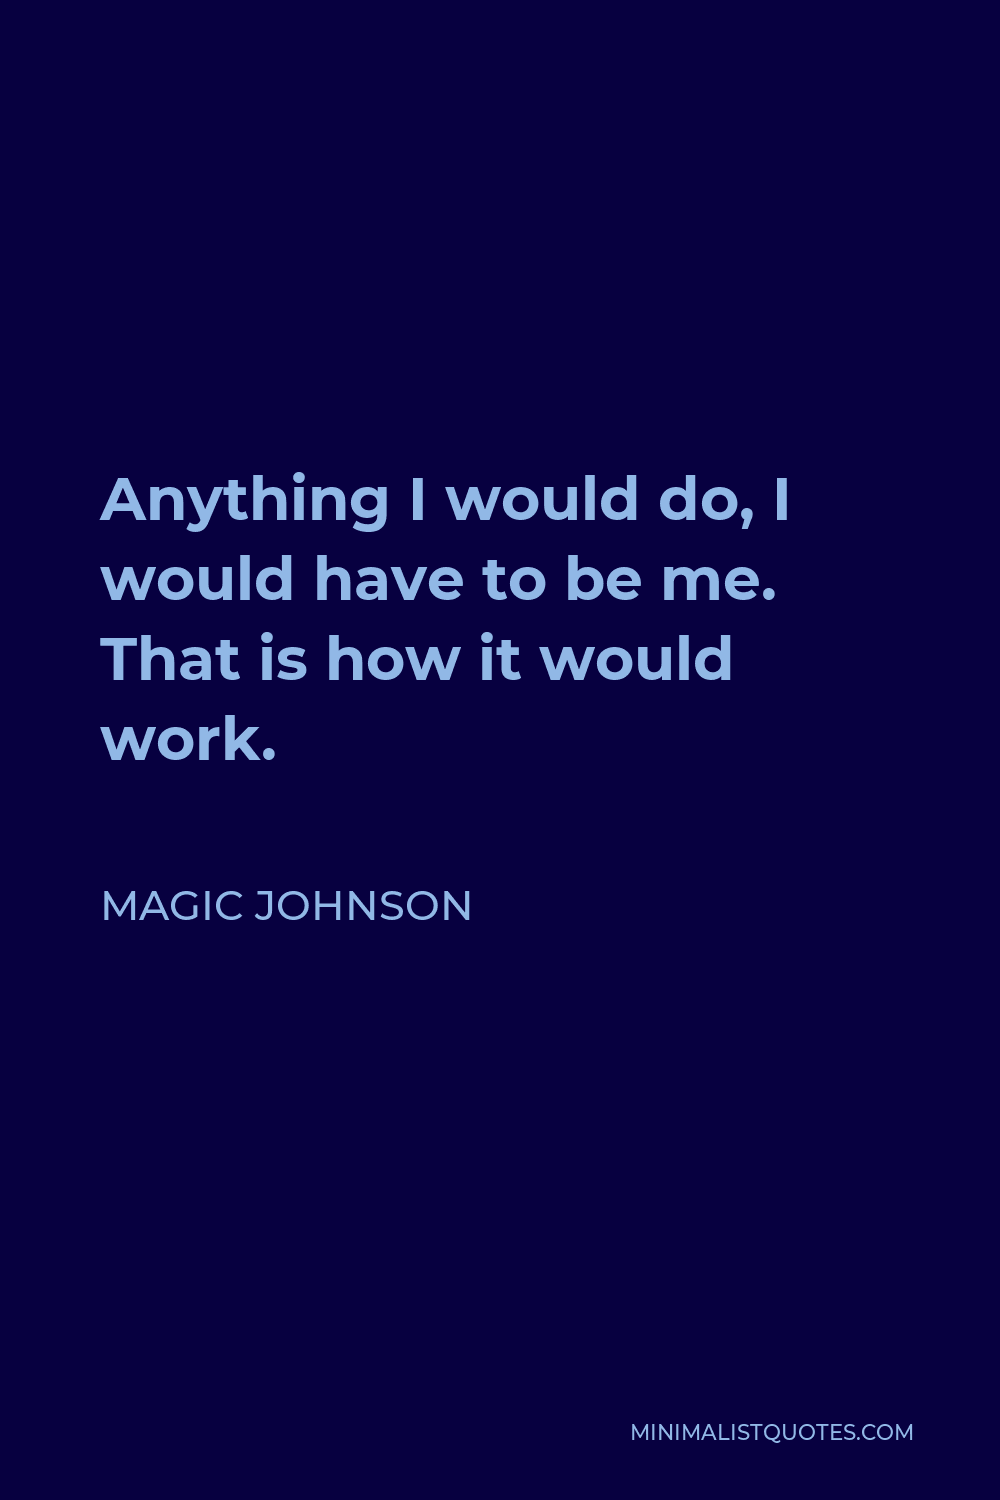 Magic Johnson Quote - Anything I would do, I would have to be me. That is how it would work.